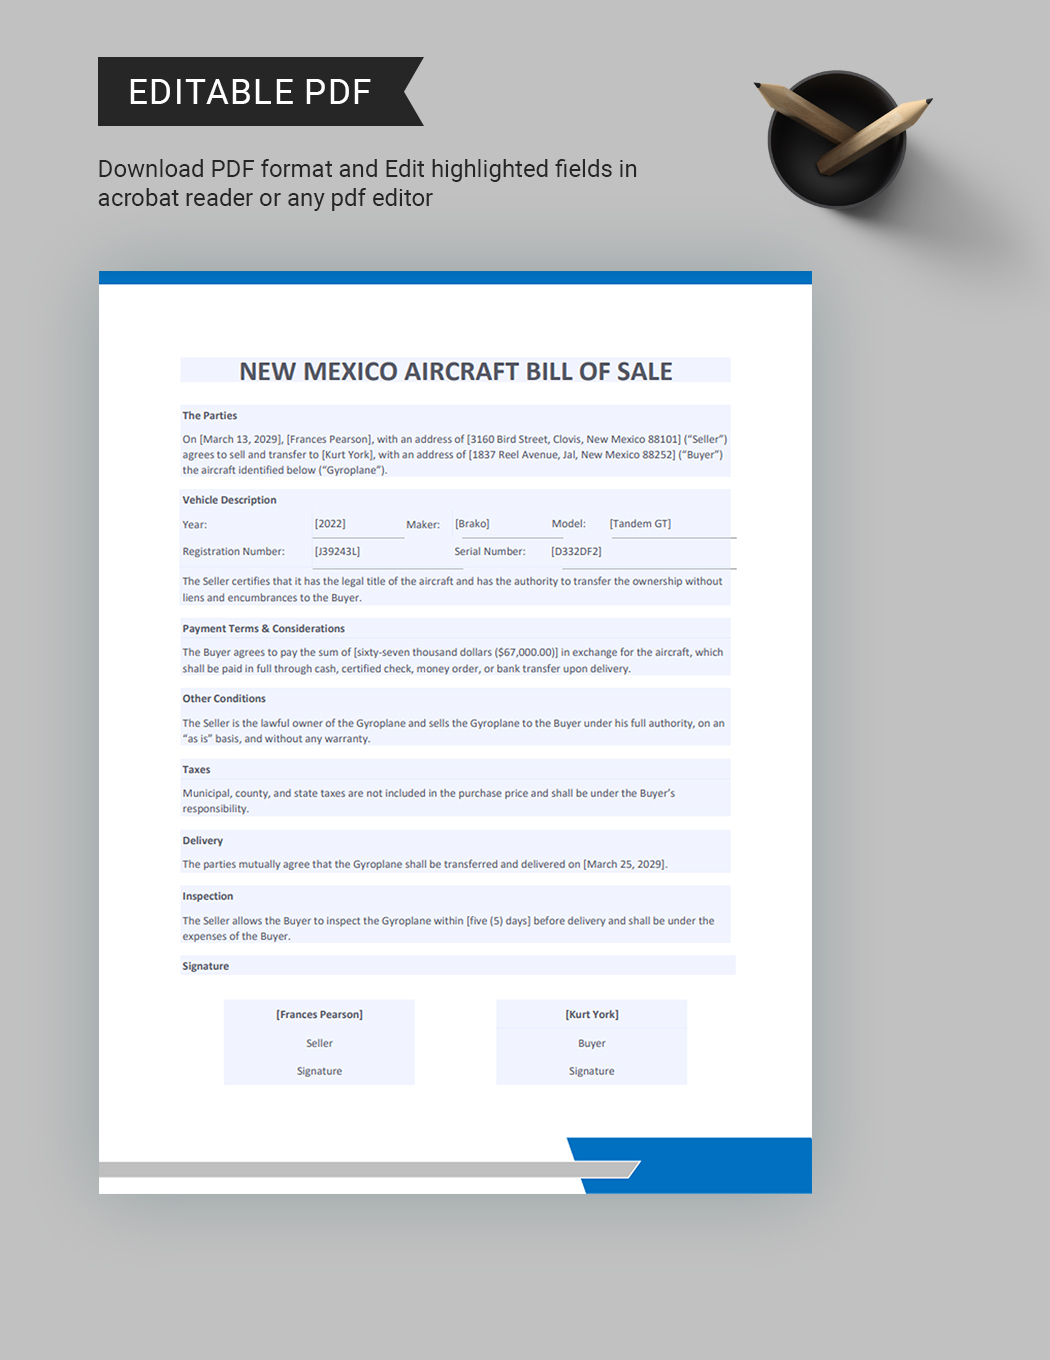 New Mexico Aircraft/Airplane Bill of Sale Template